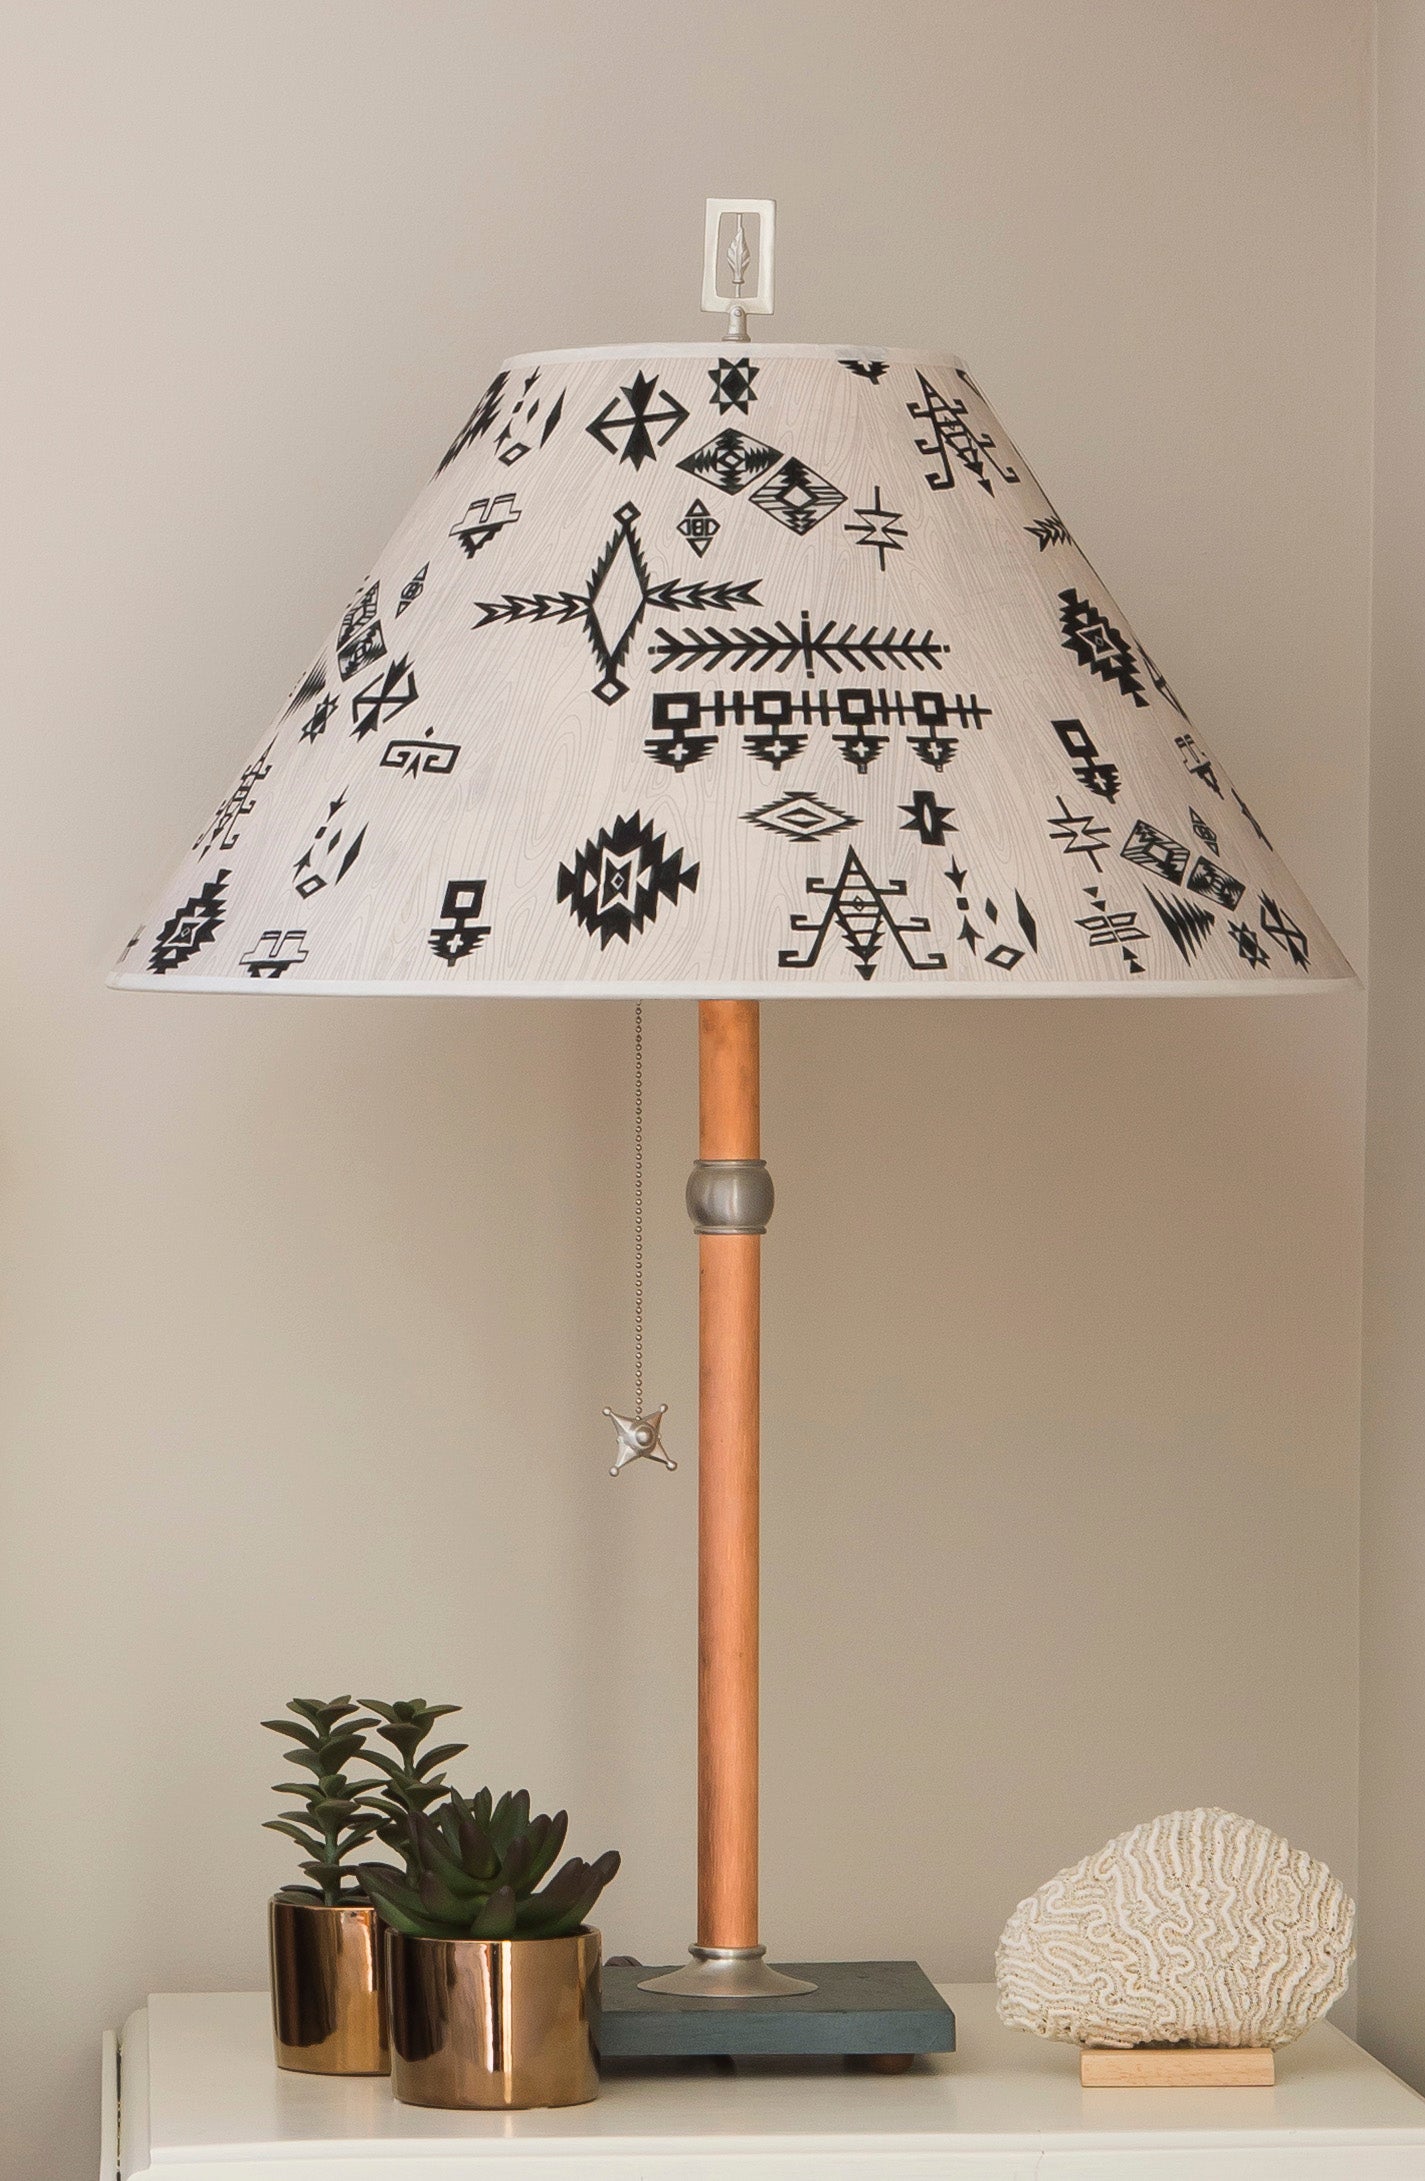 Janna Ugone & Co Table Lamps Copper Table Lamp with Large Conical Shade in Blanket Sketch